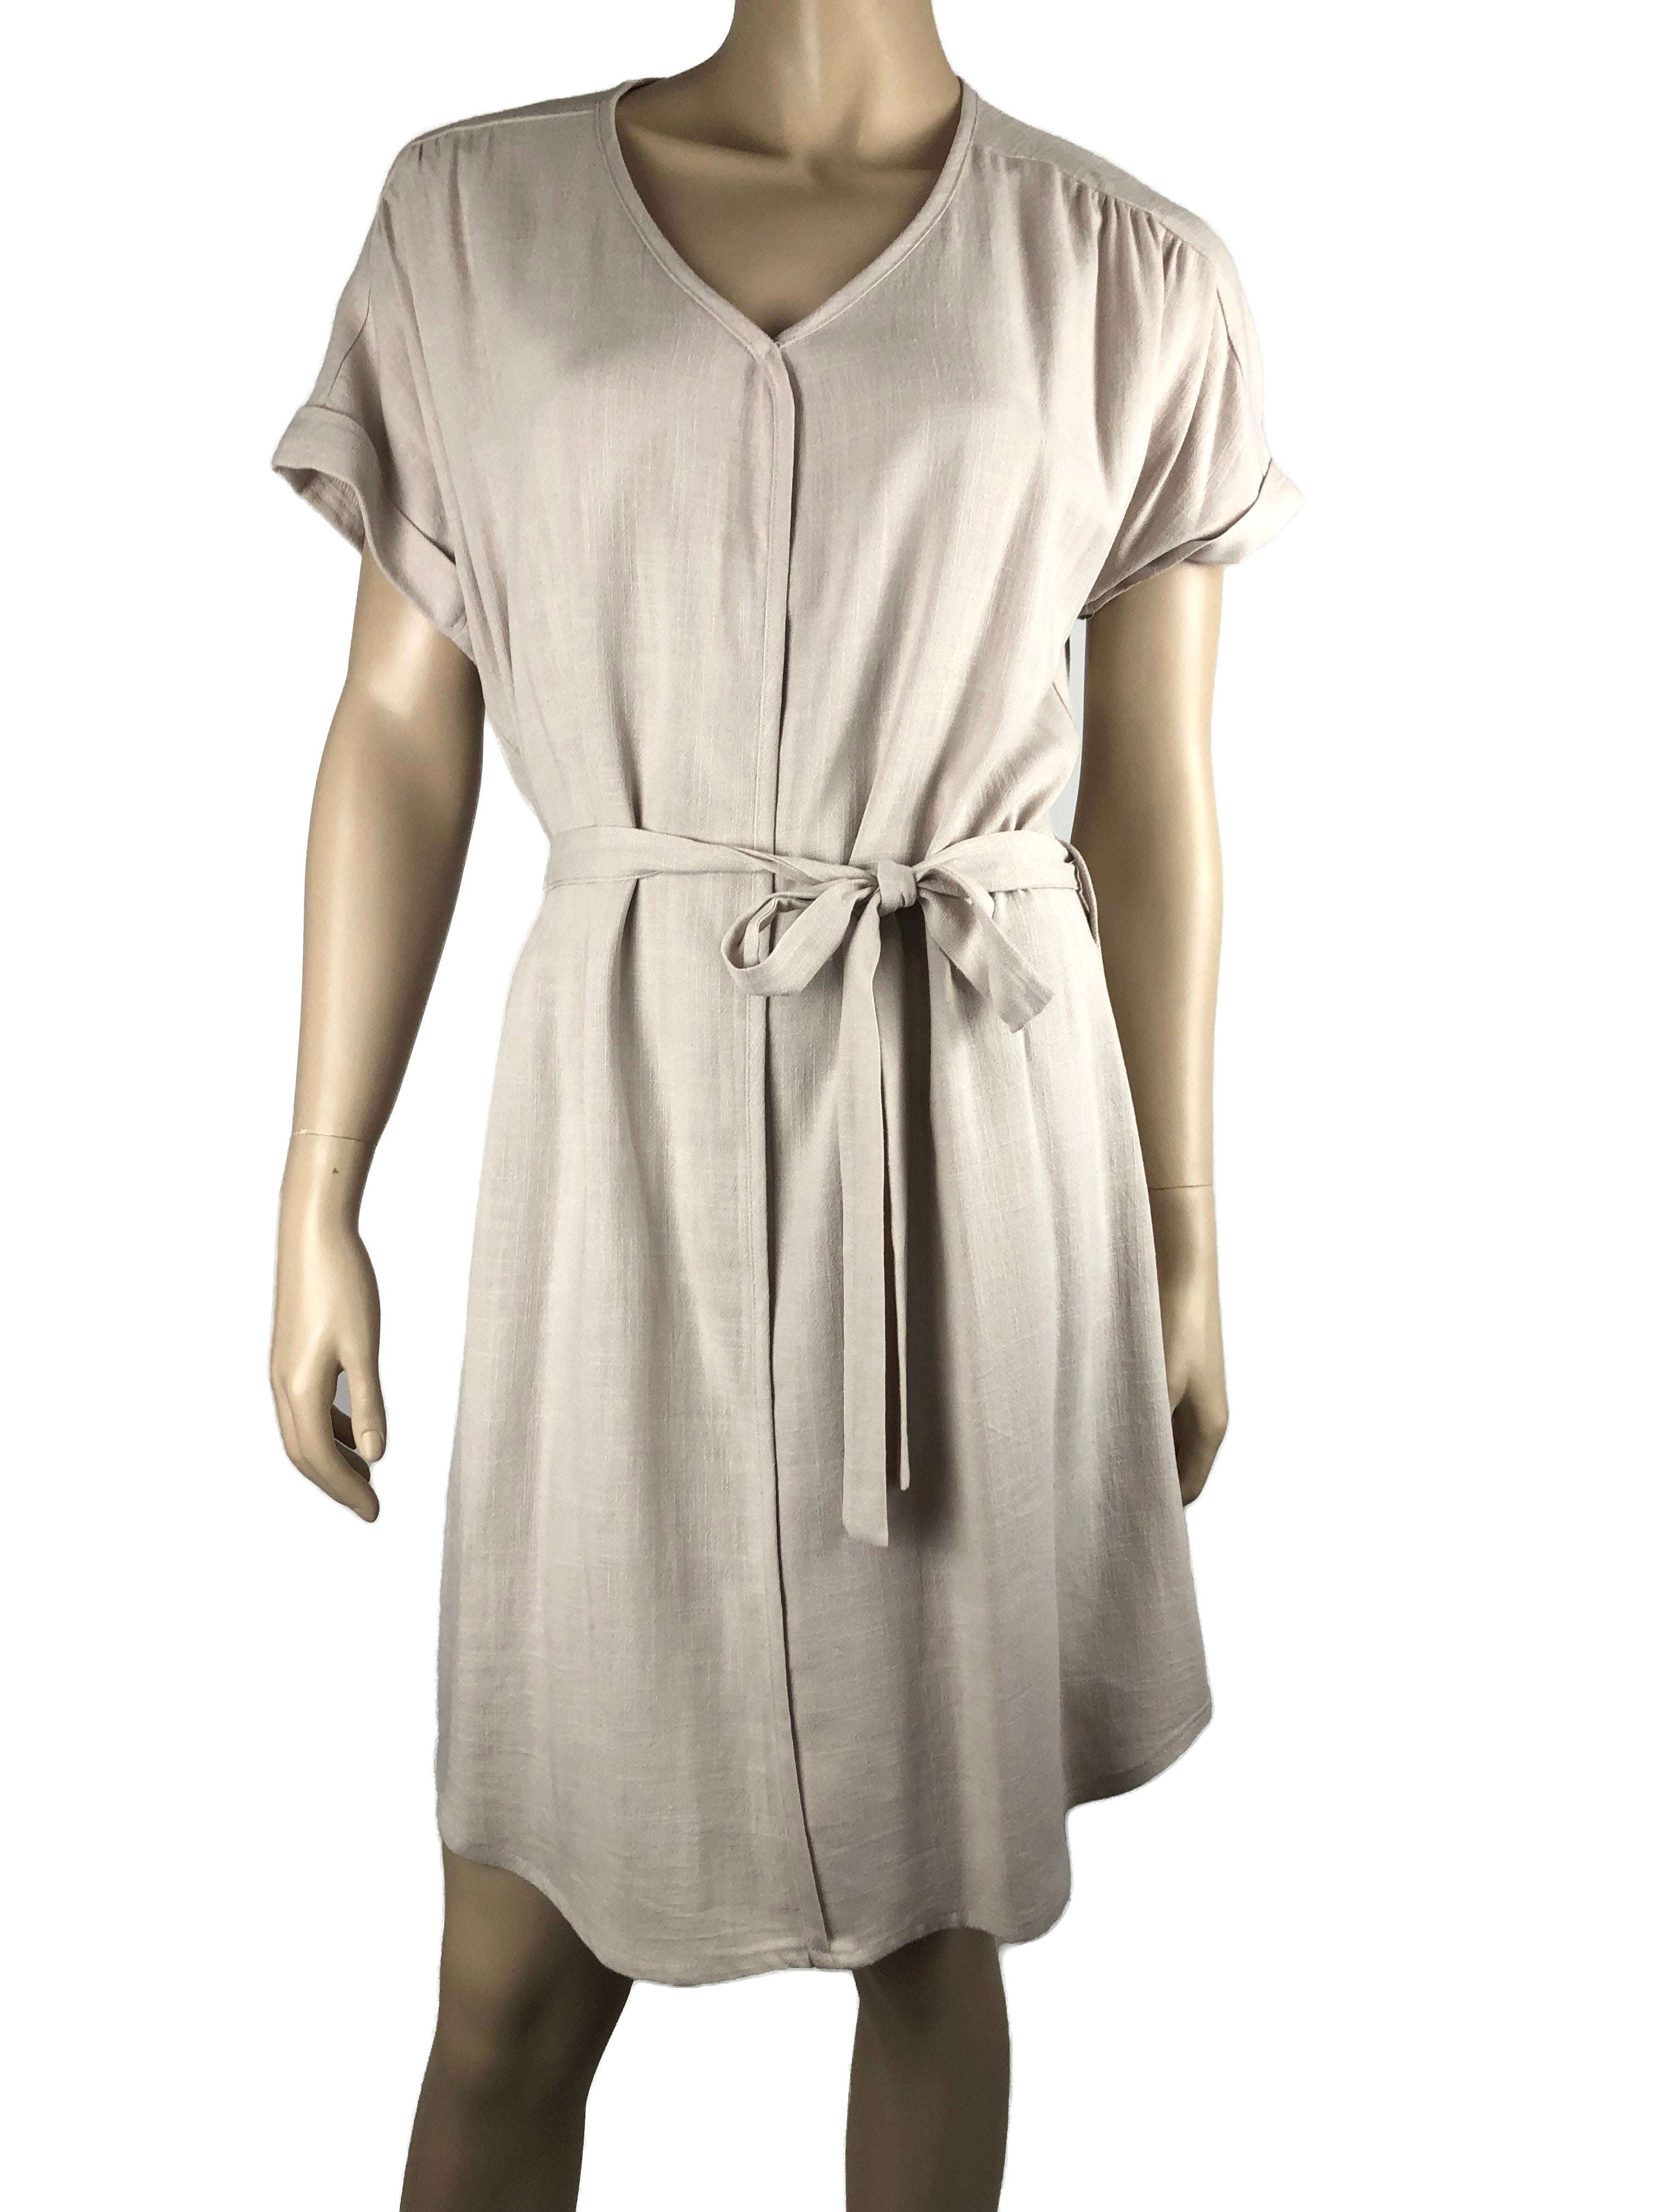 Women's Dress On Sale Canada Natural Color Shirt Dress on Sale now 50 off Made in Canada - Yvonne Marie - Yvonne Marie